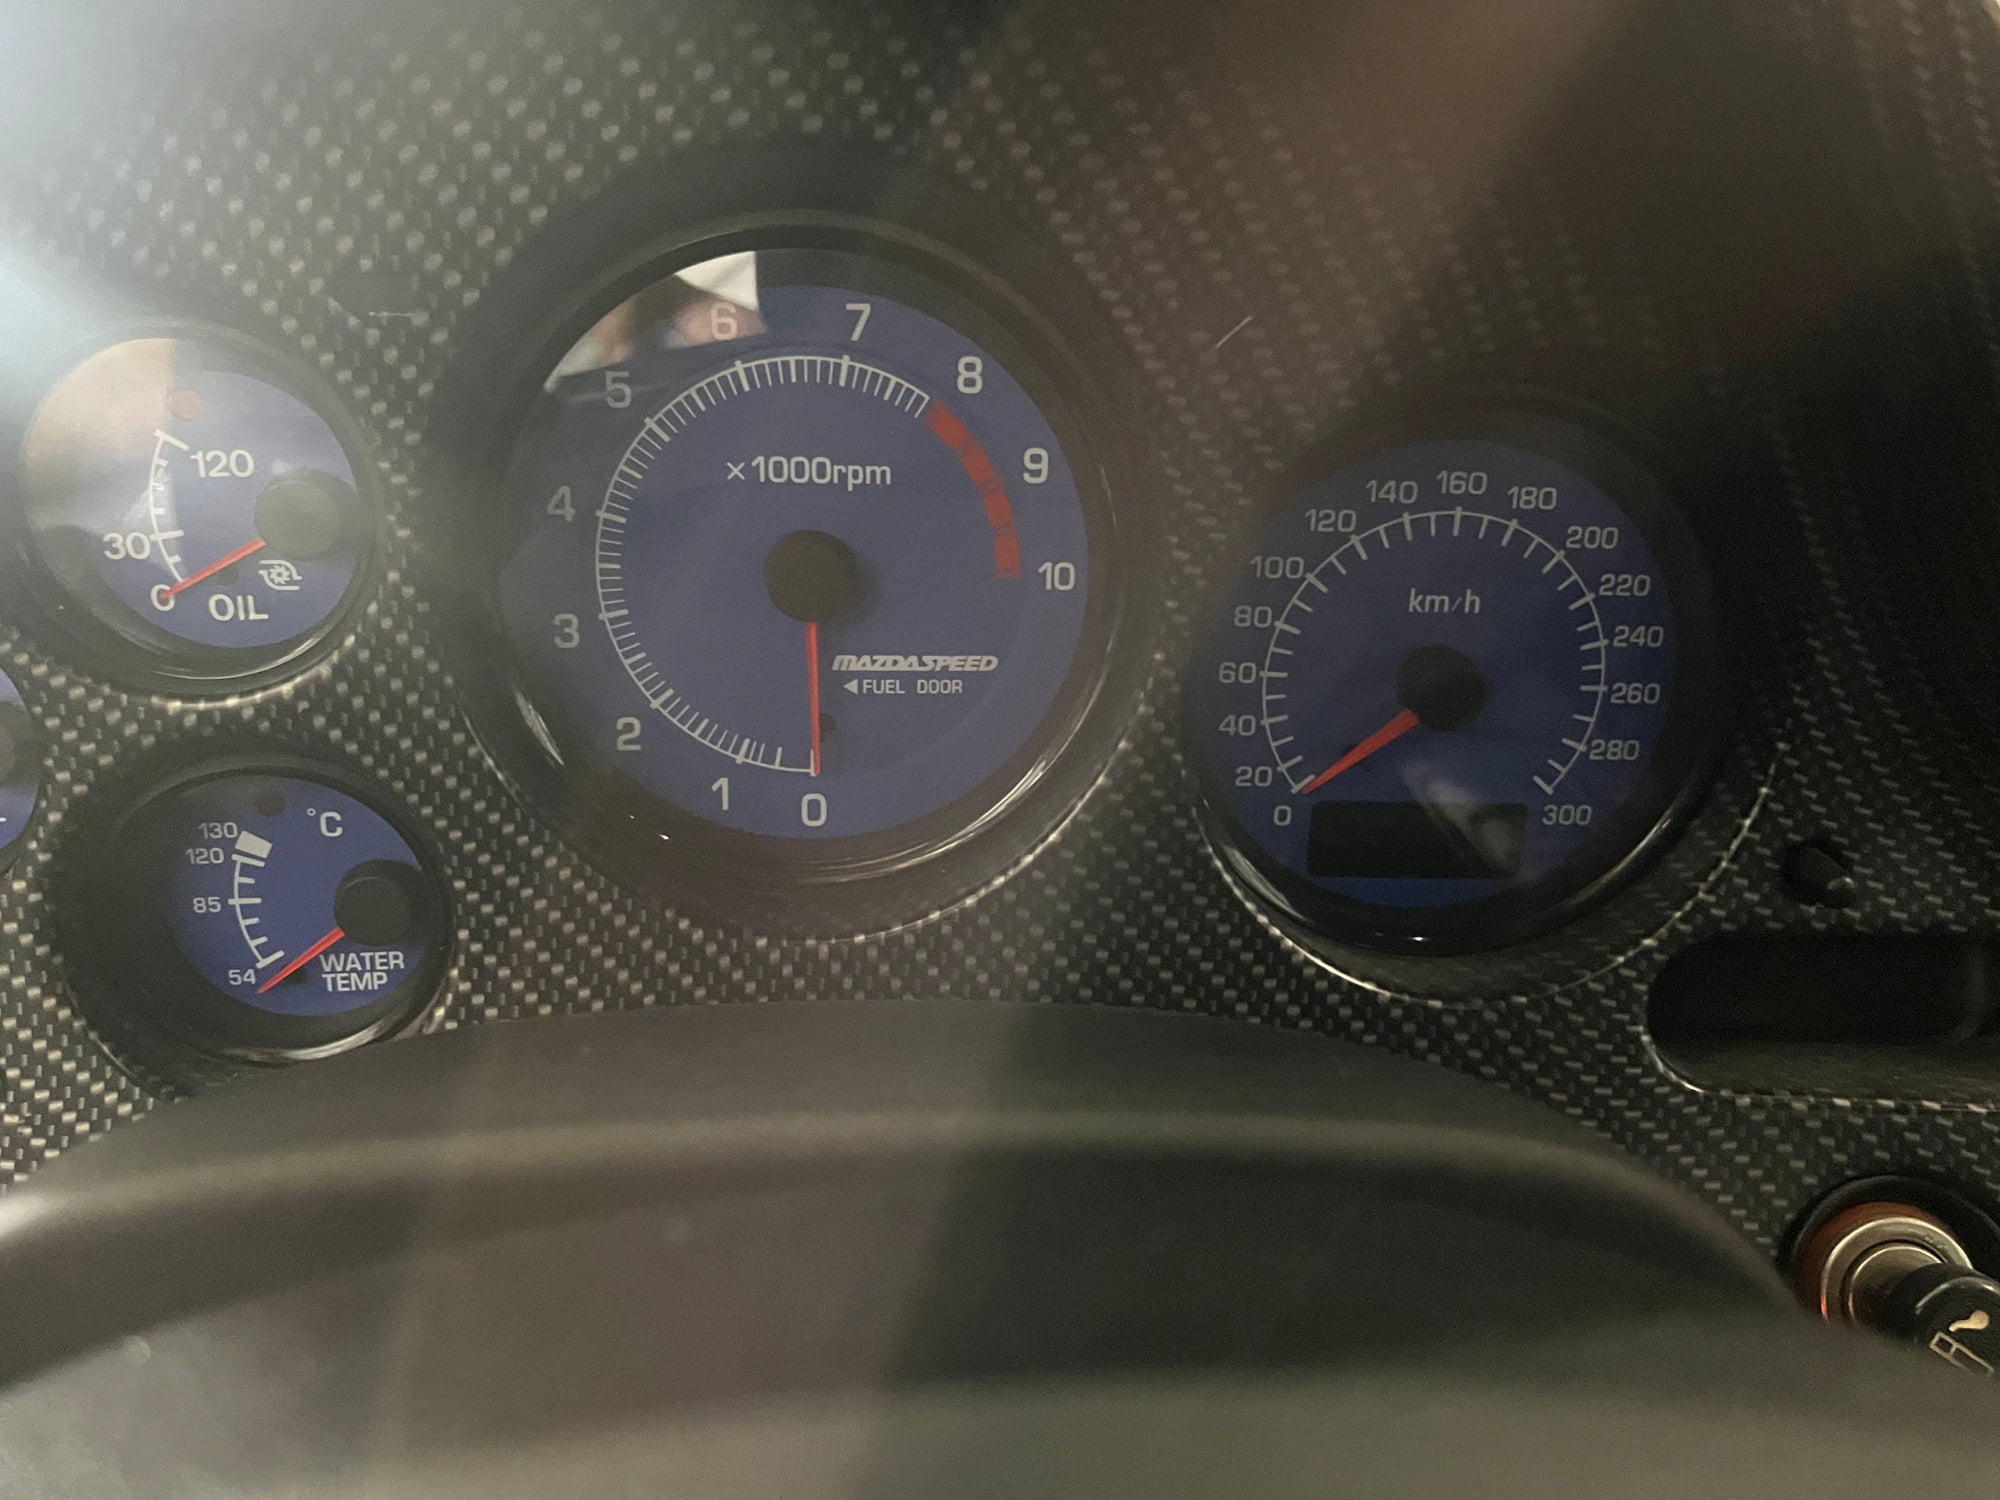 Interior/Upholstery - Mazdaspeed 300 km Blue Cluster for sale Mint - Used - 1993 to 2002 Mazda RX-7 - Miami, FL 33166, United States